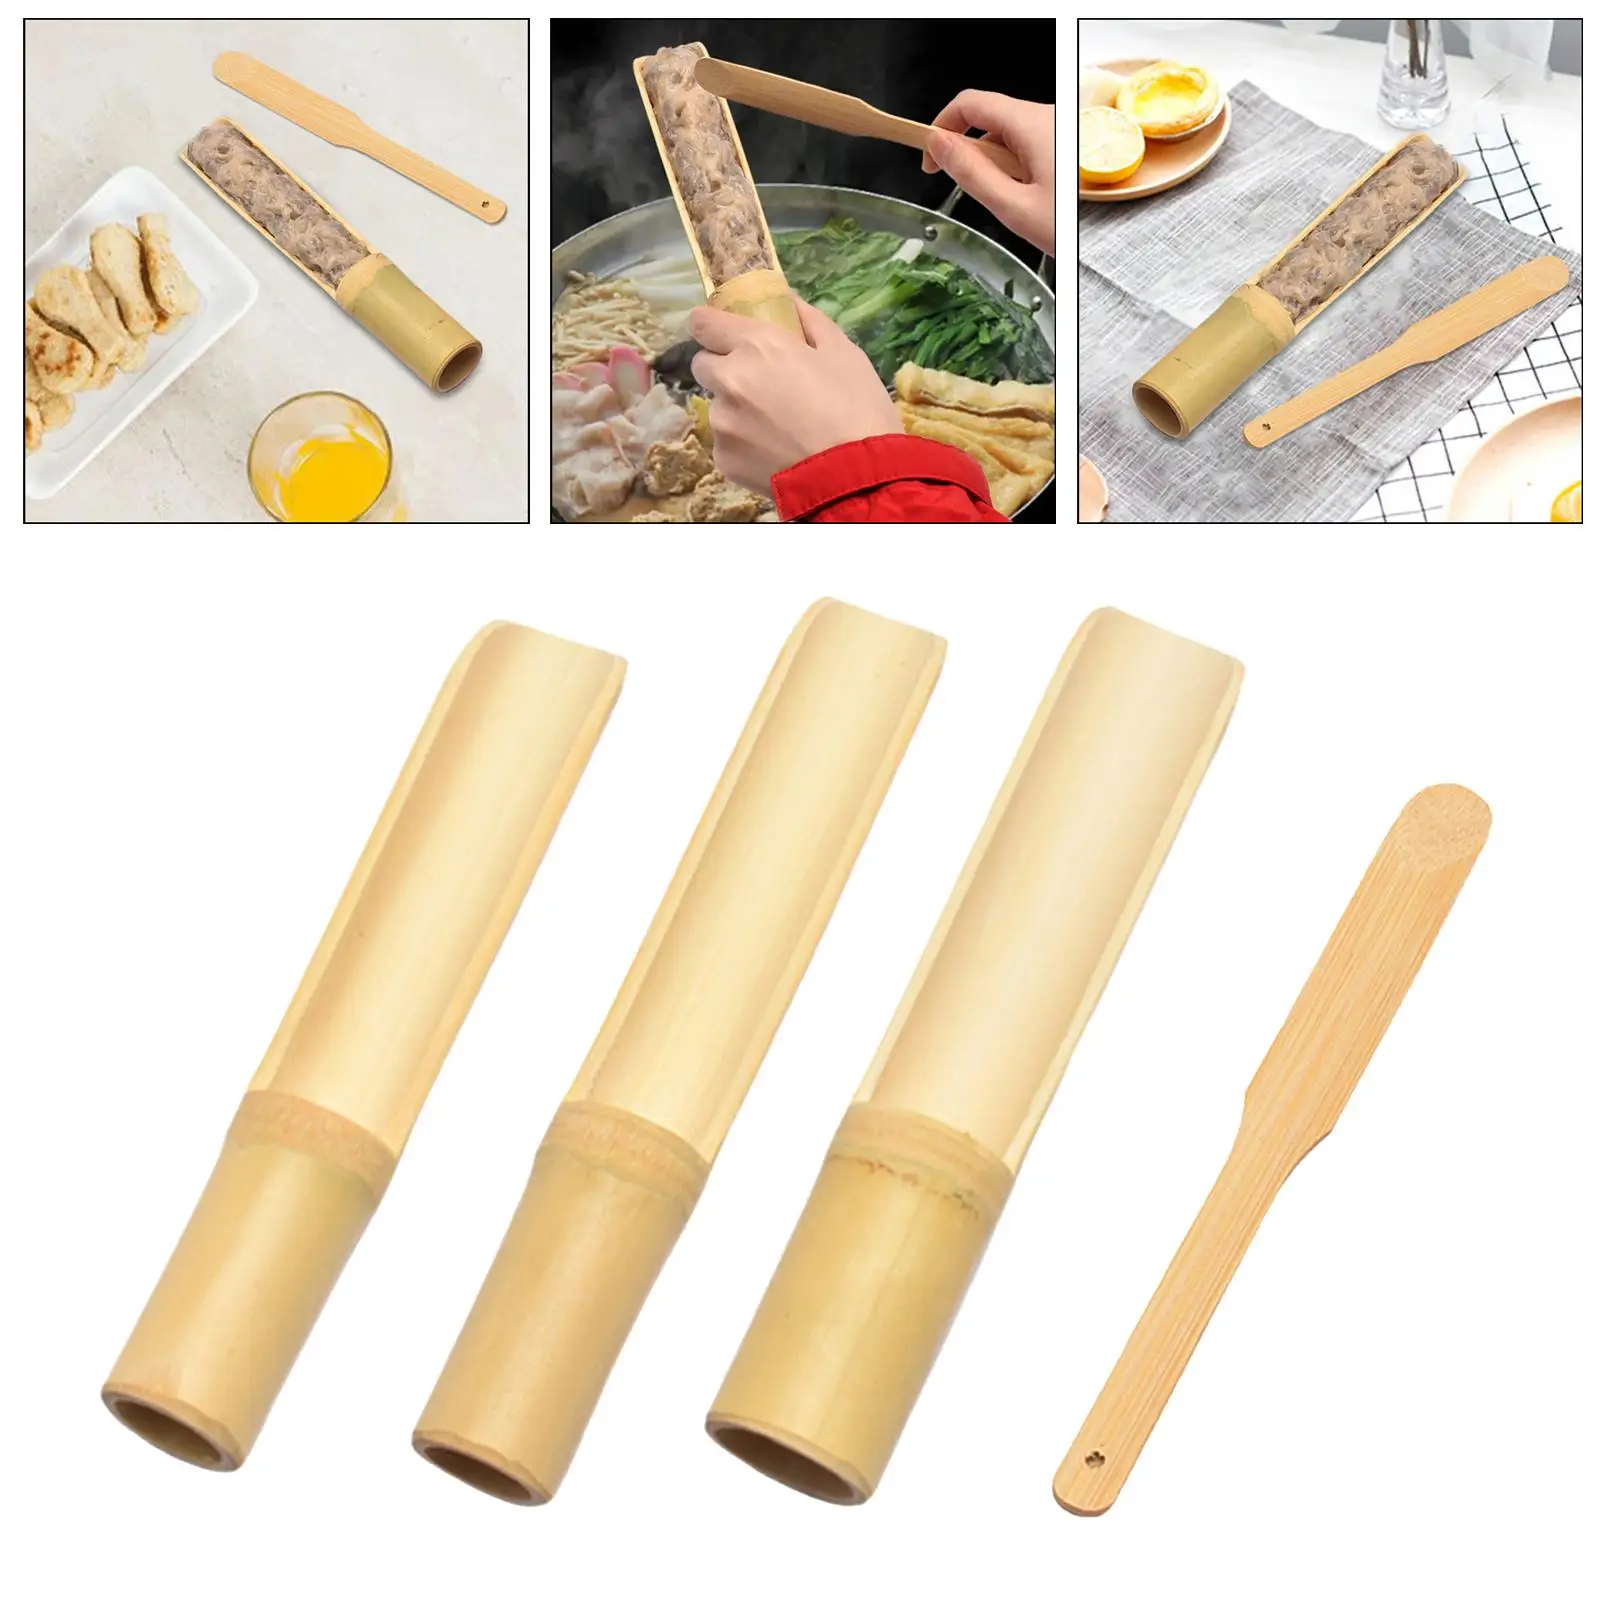 Meatball Maker Accessories with Cutting Spade Set for Making Sliding